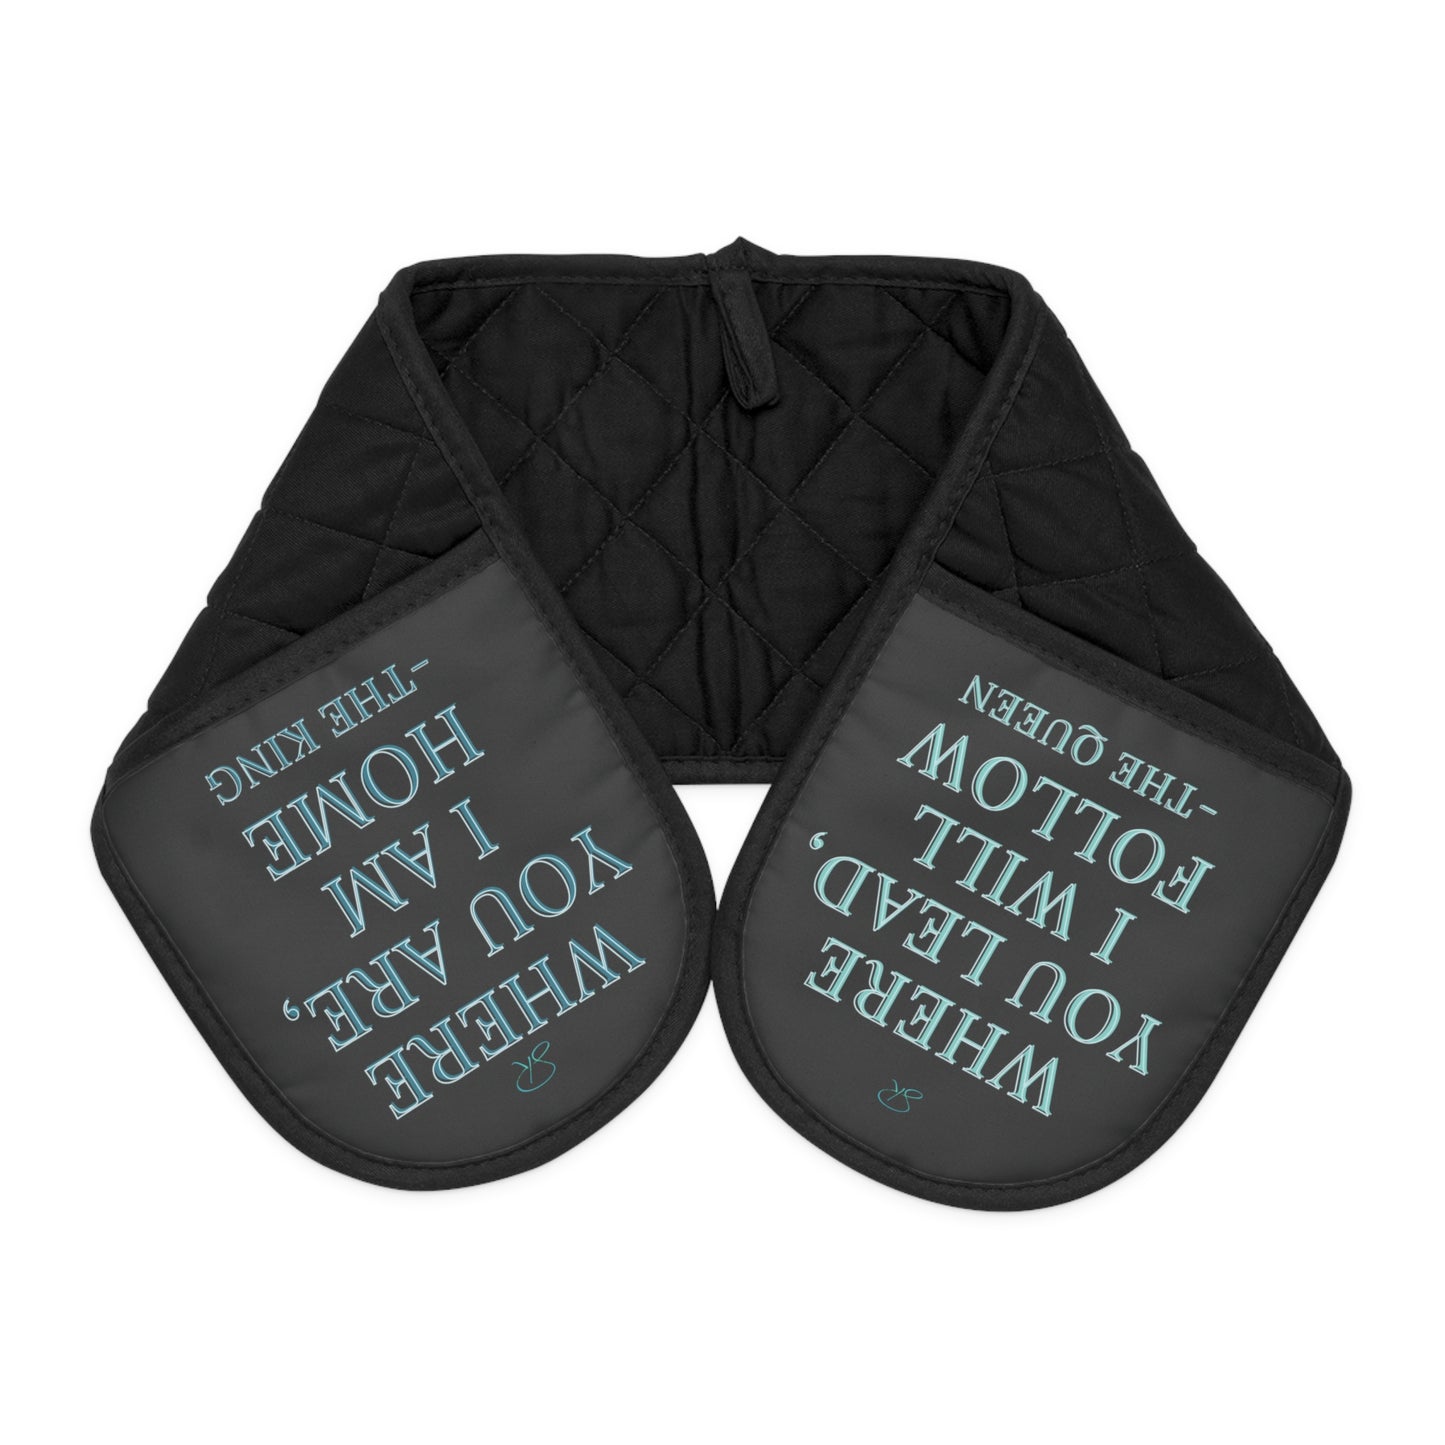 "Lead Our Home" Oven Mitts